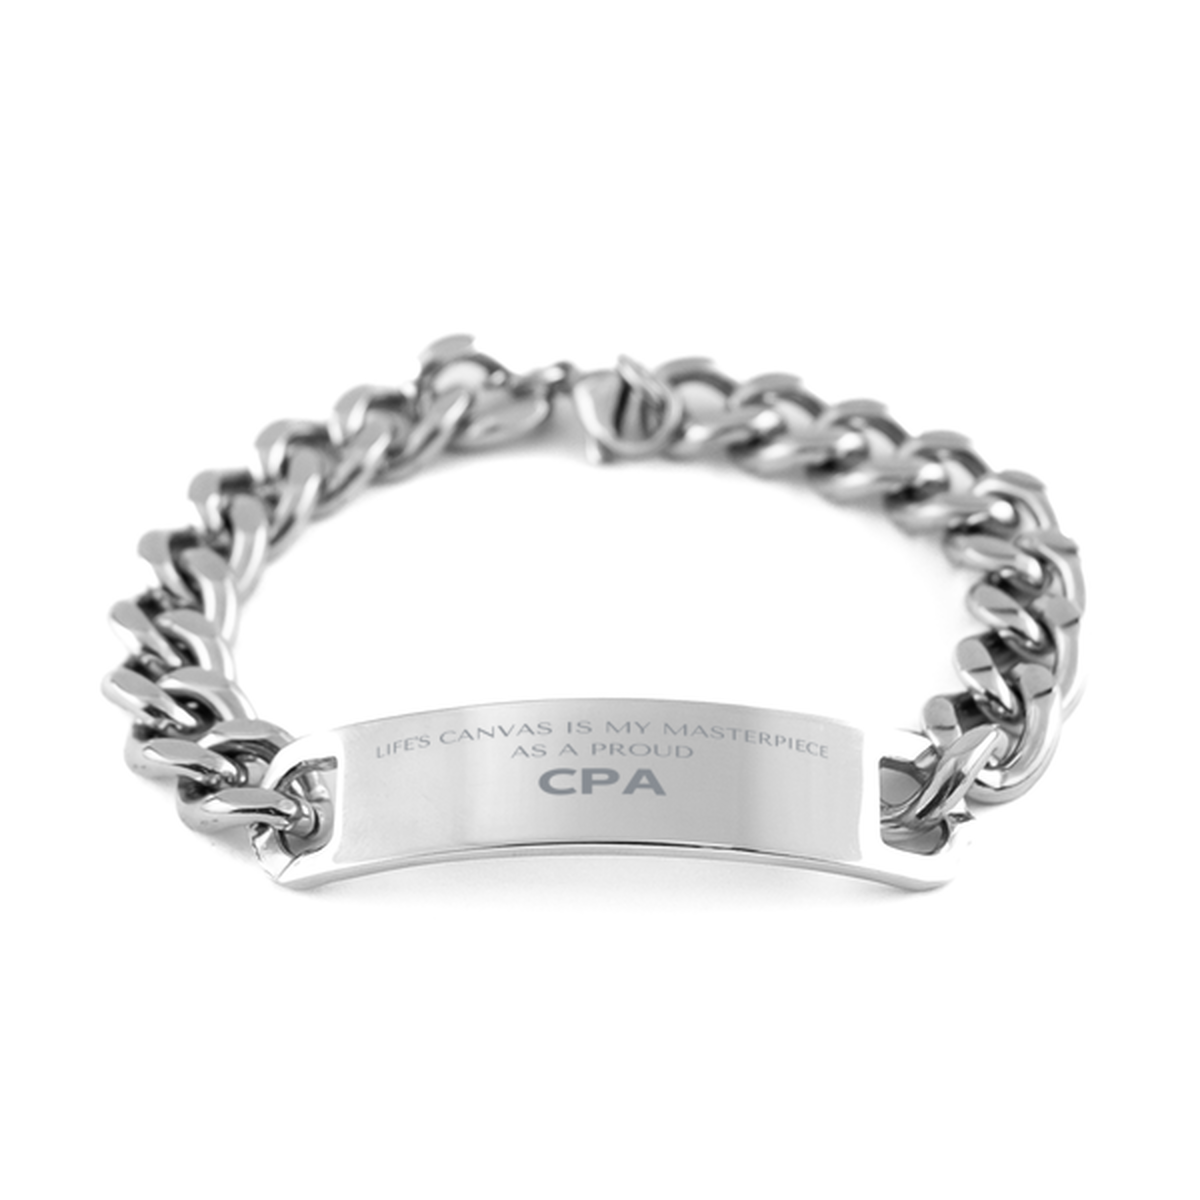 Proud CPA Gifts, Life's canvas is my masterpiece, Epic Birthday Christmas Unique Cuban Chain Stainless Steel Bracelet For CPA, Coworkers, Men, Women, Friends